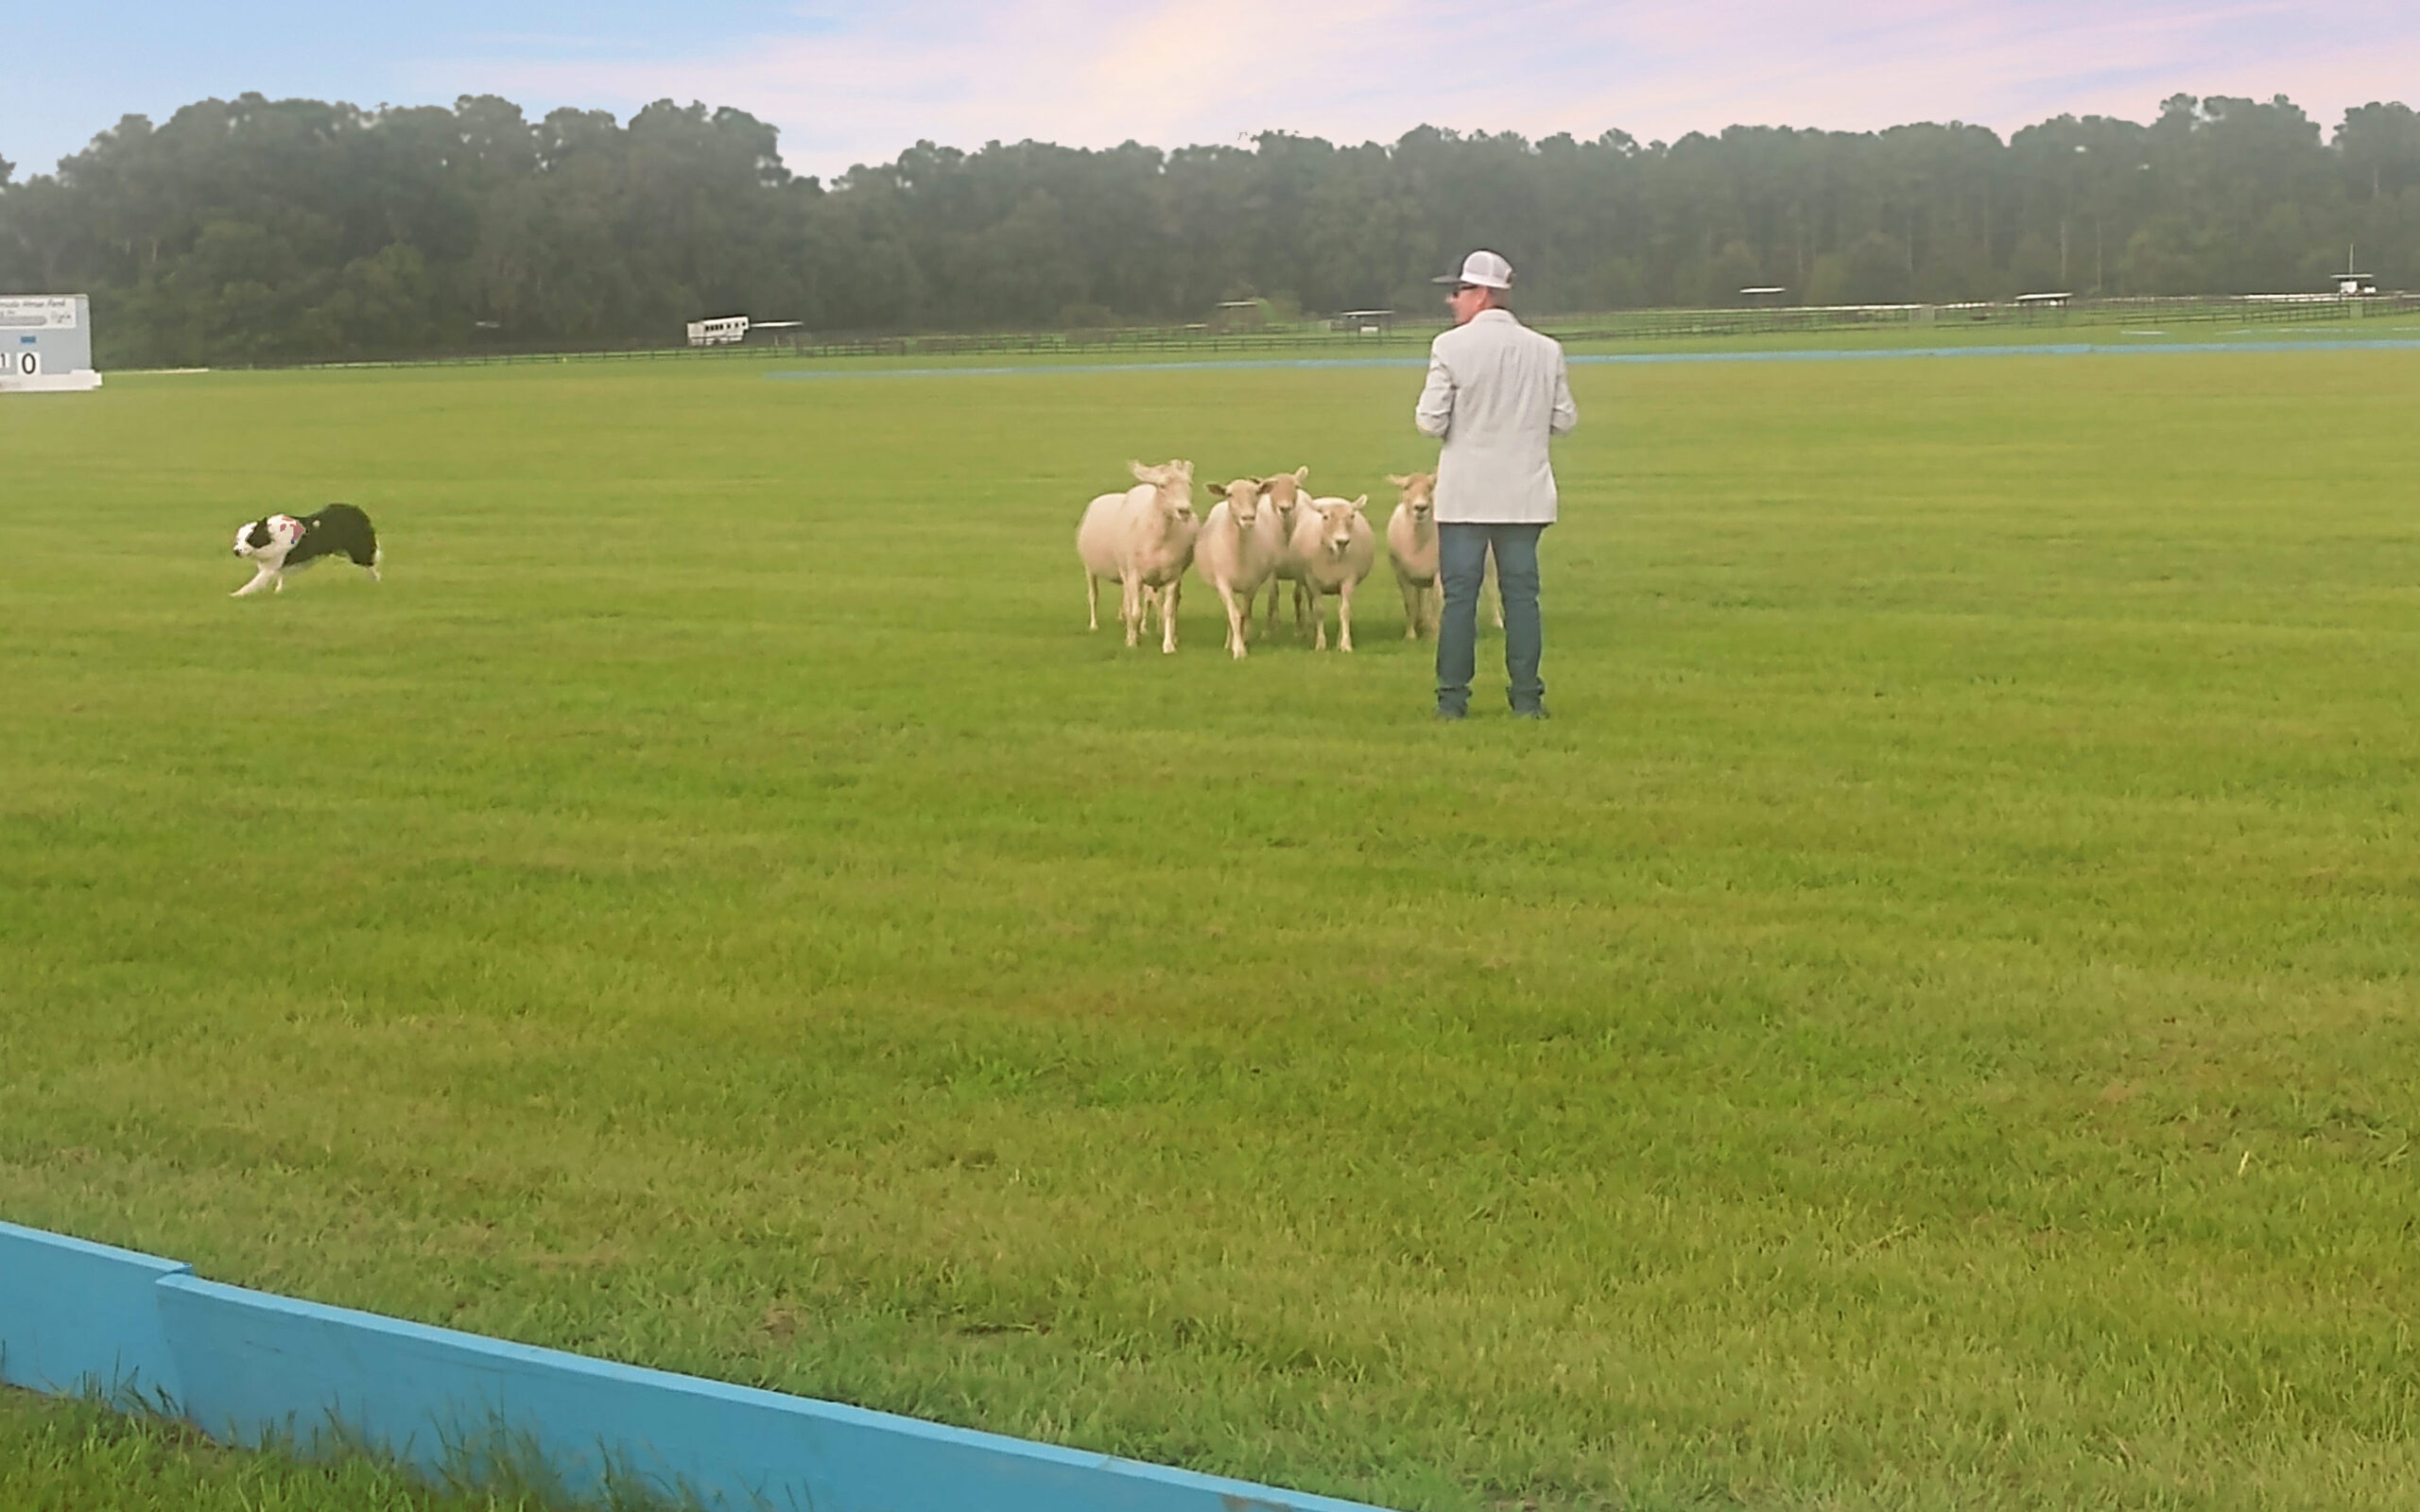 Another view of the sheep herding exhibition at the Florida Horse Park.